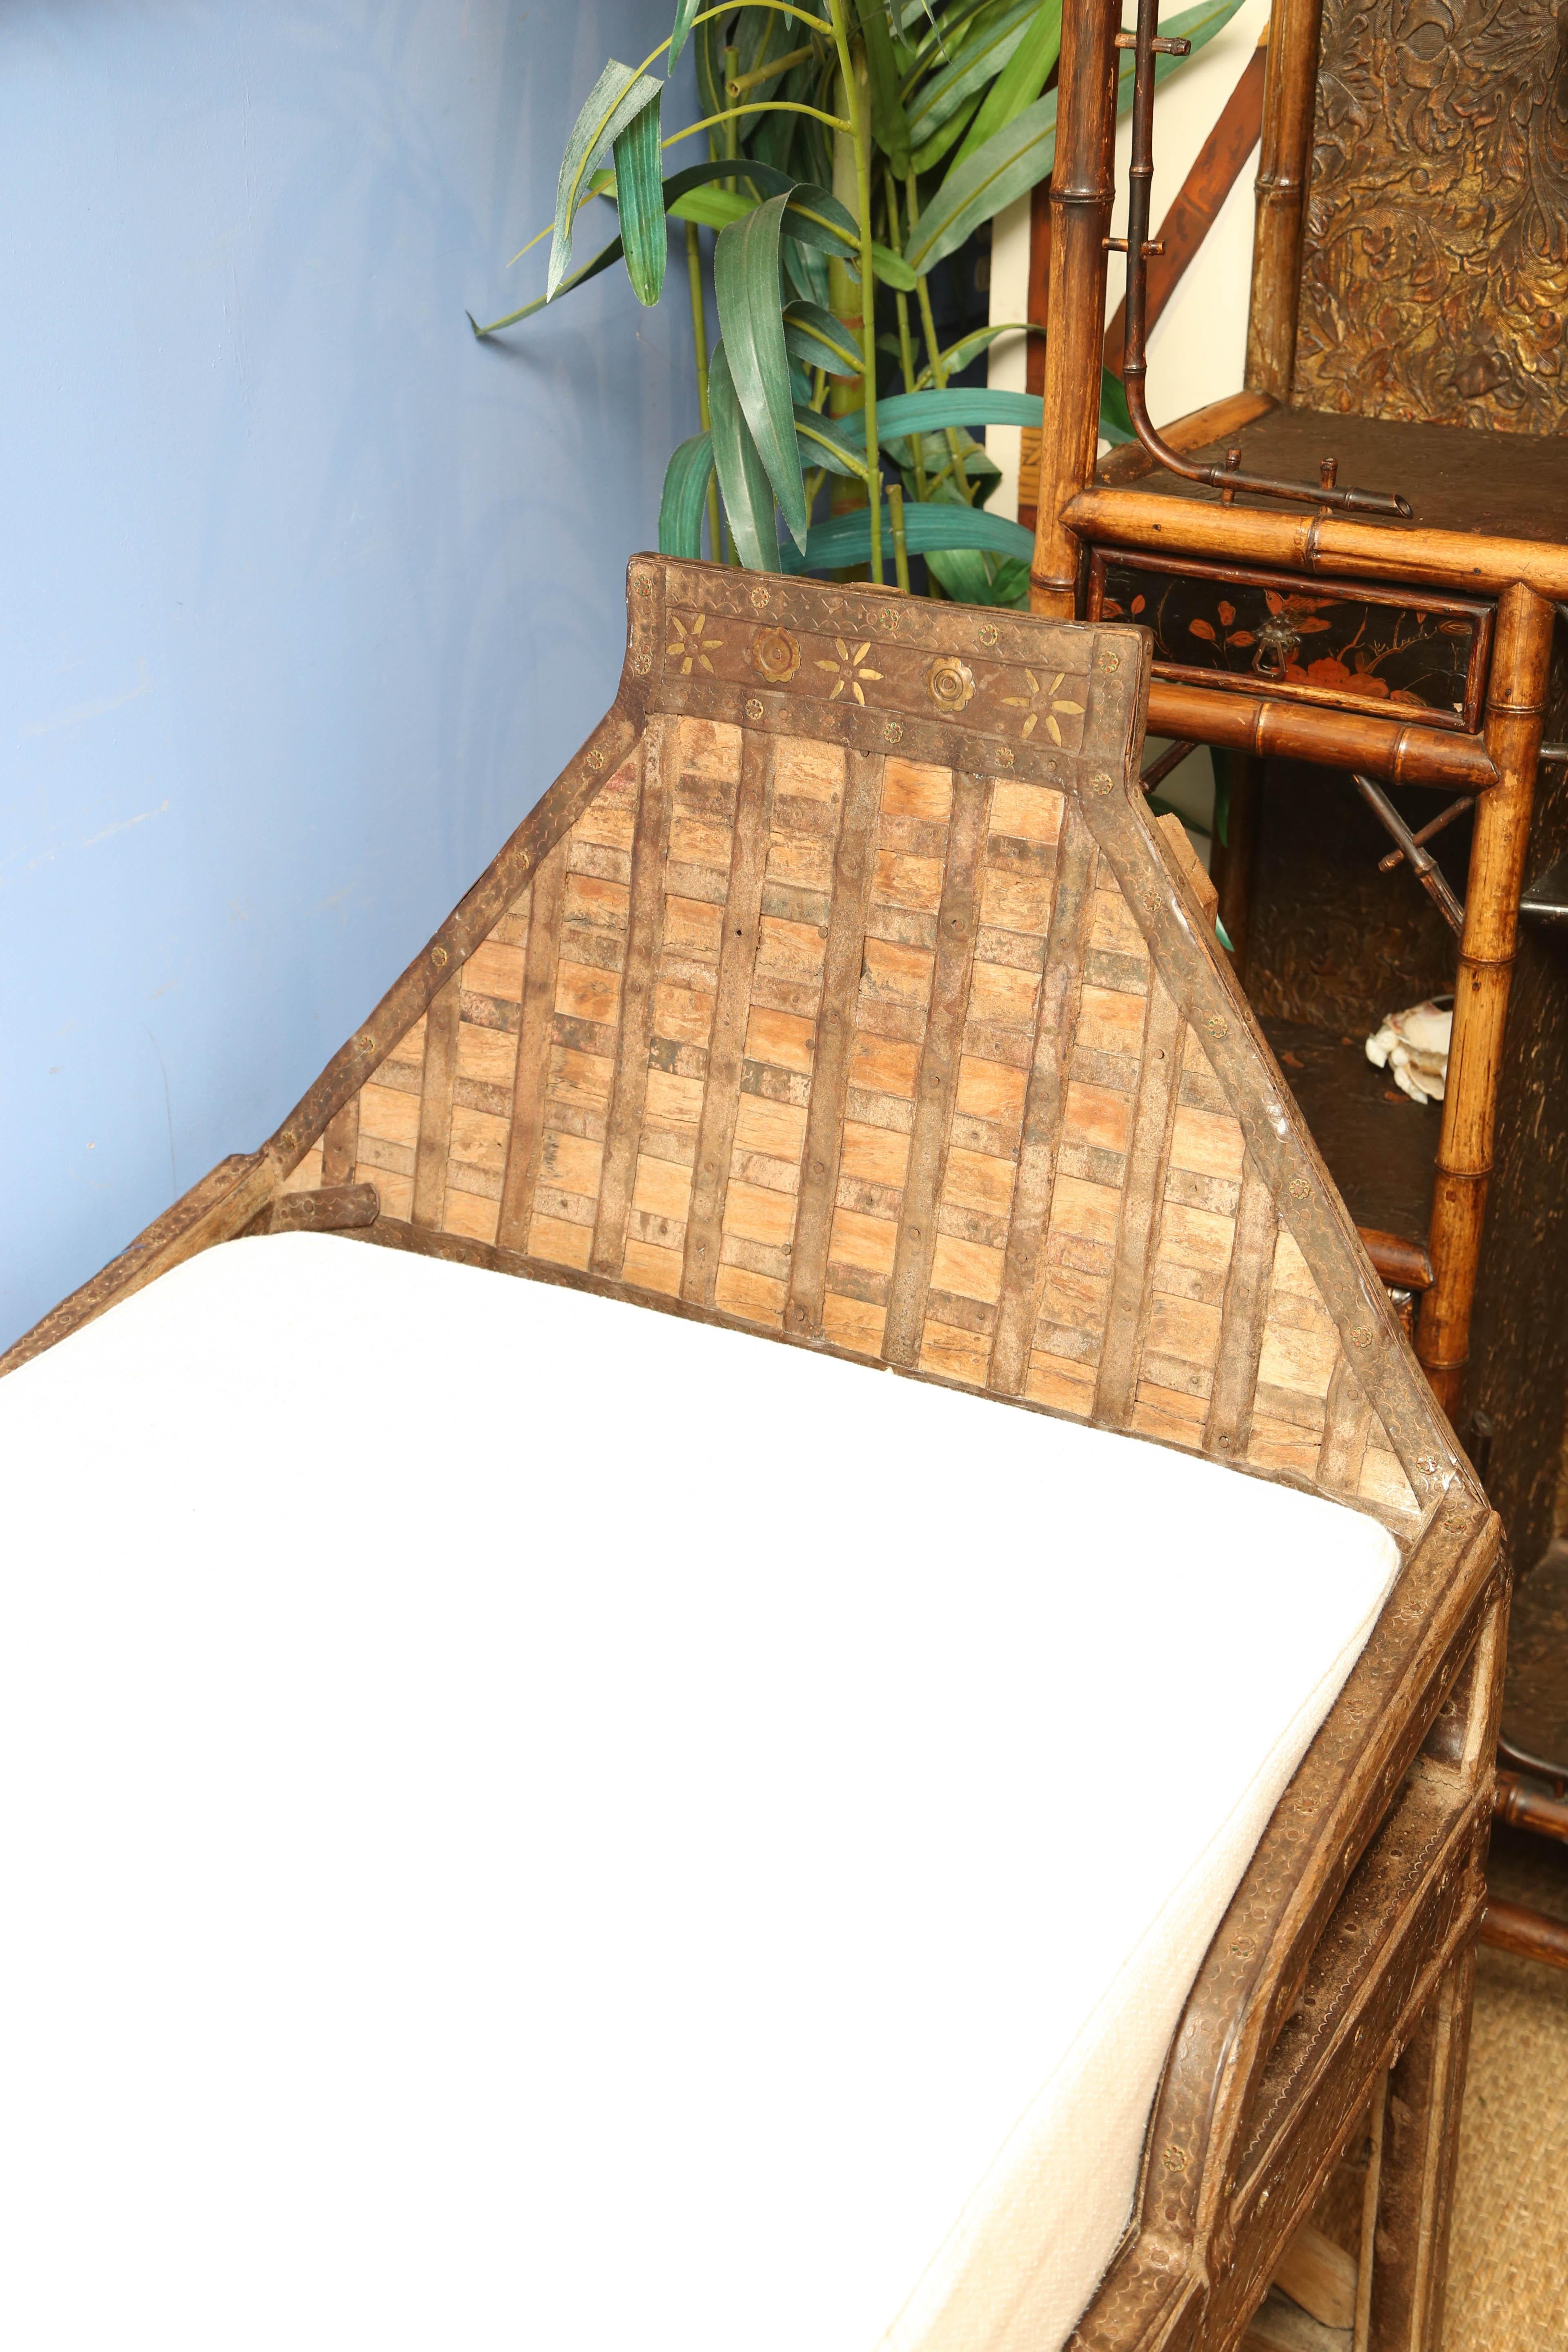 An 19th century Indian iron mounted bed with wood and a firm mattress. Very comfortable! The day bed is 27 inches high with the mattress and 21 inches without it.